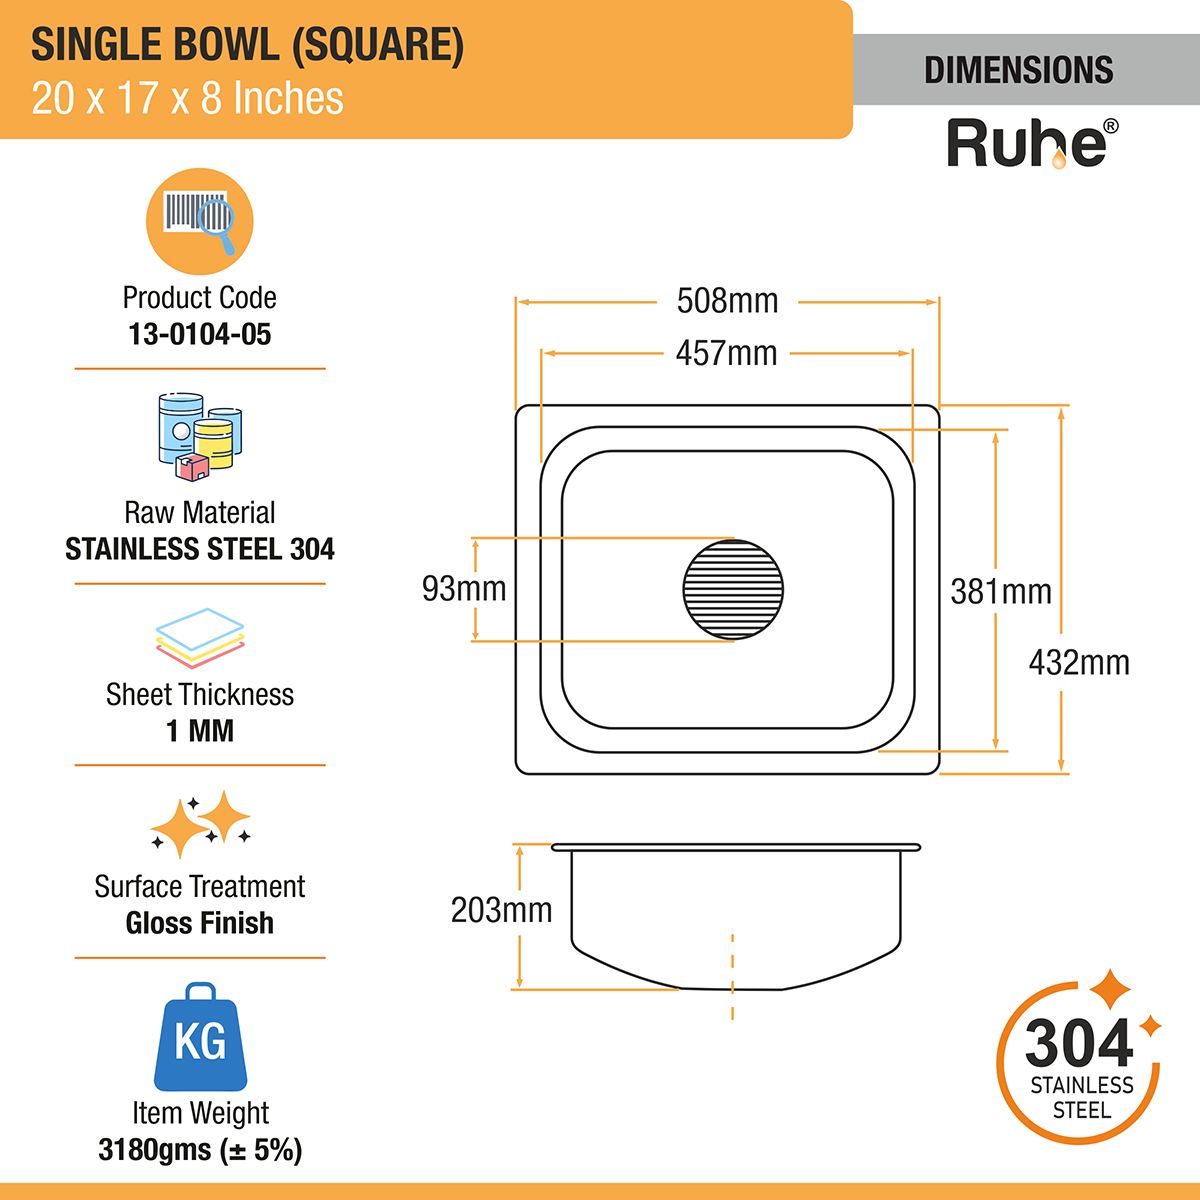 Square Single Bowl (20 x 17 x 8 inches) 304-Grade Kitchen Sink dimensions and sizes